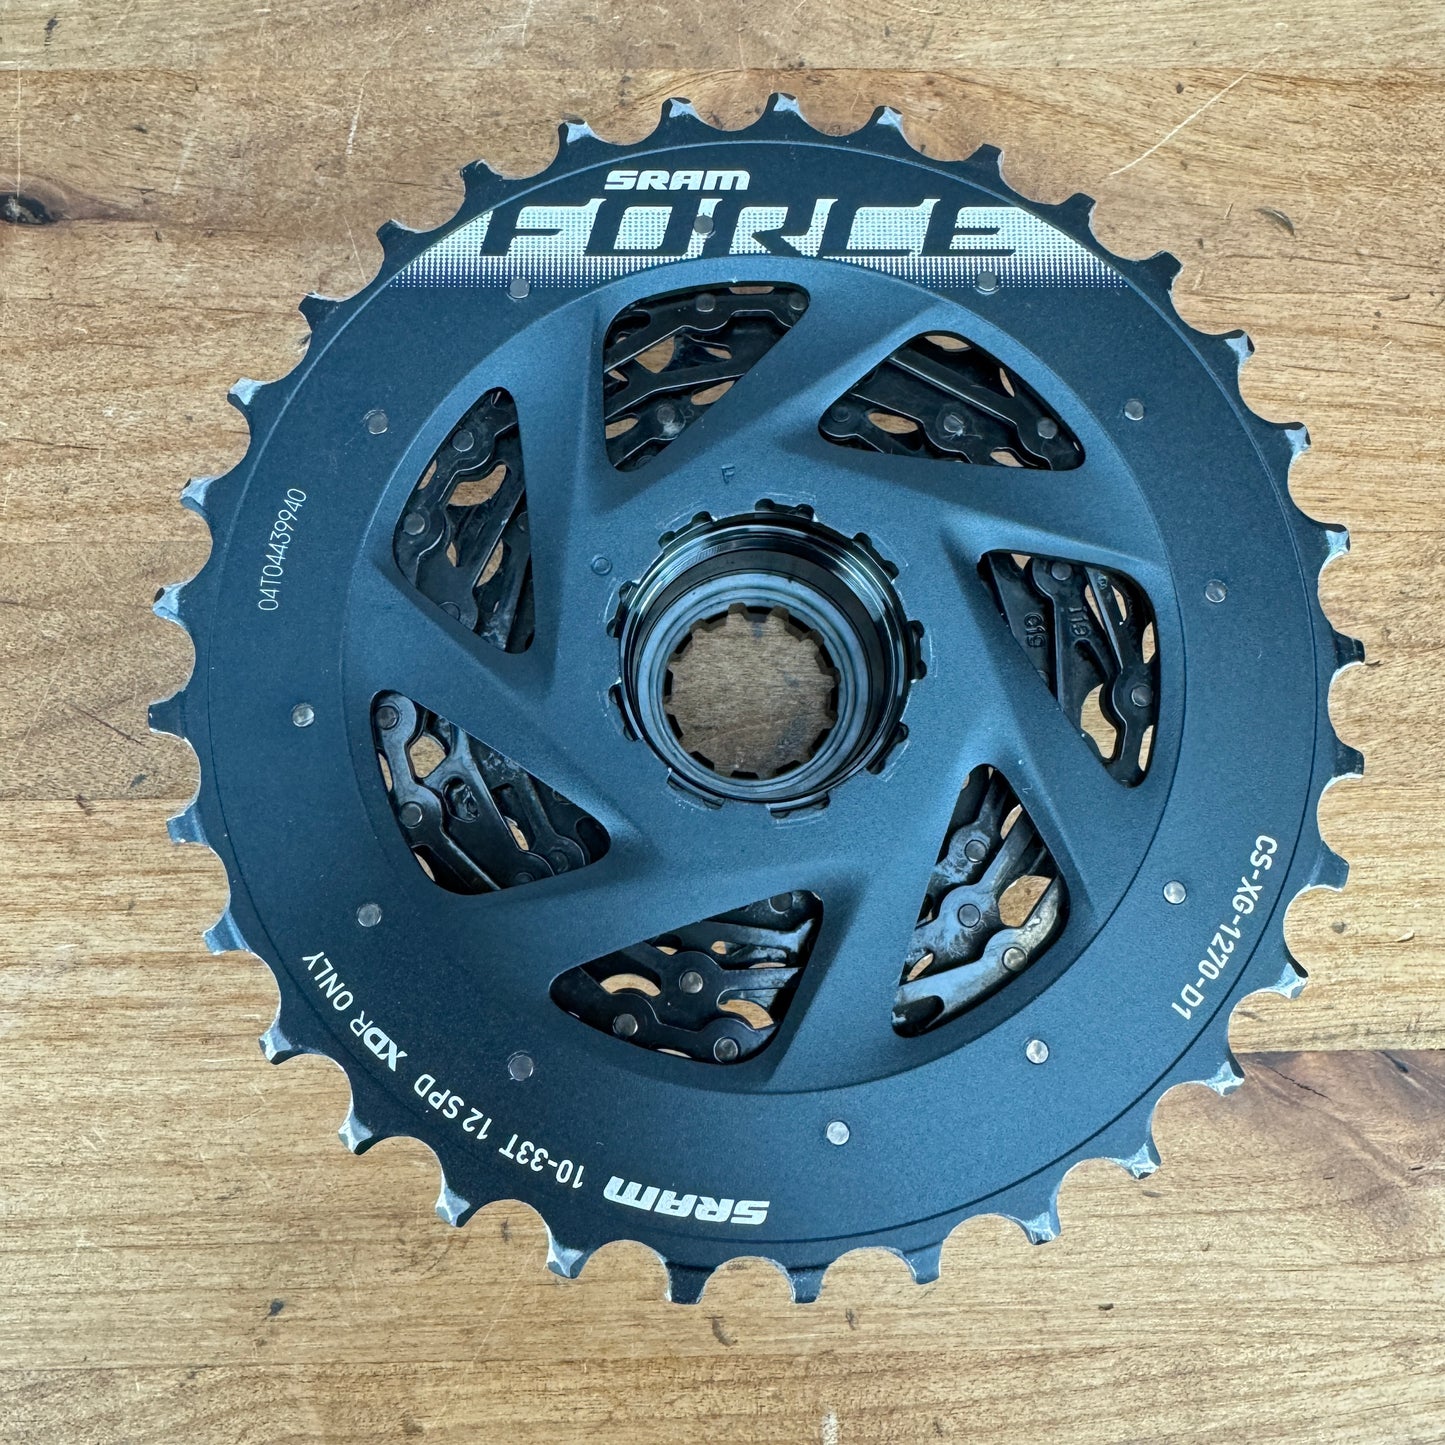 SRAM Force AXS XG-1270 10-33t 12-Speed Bicycle Cassette "Typical Wear" 267g